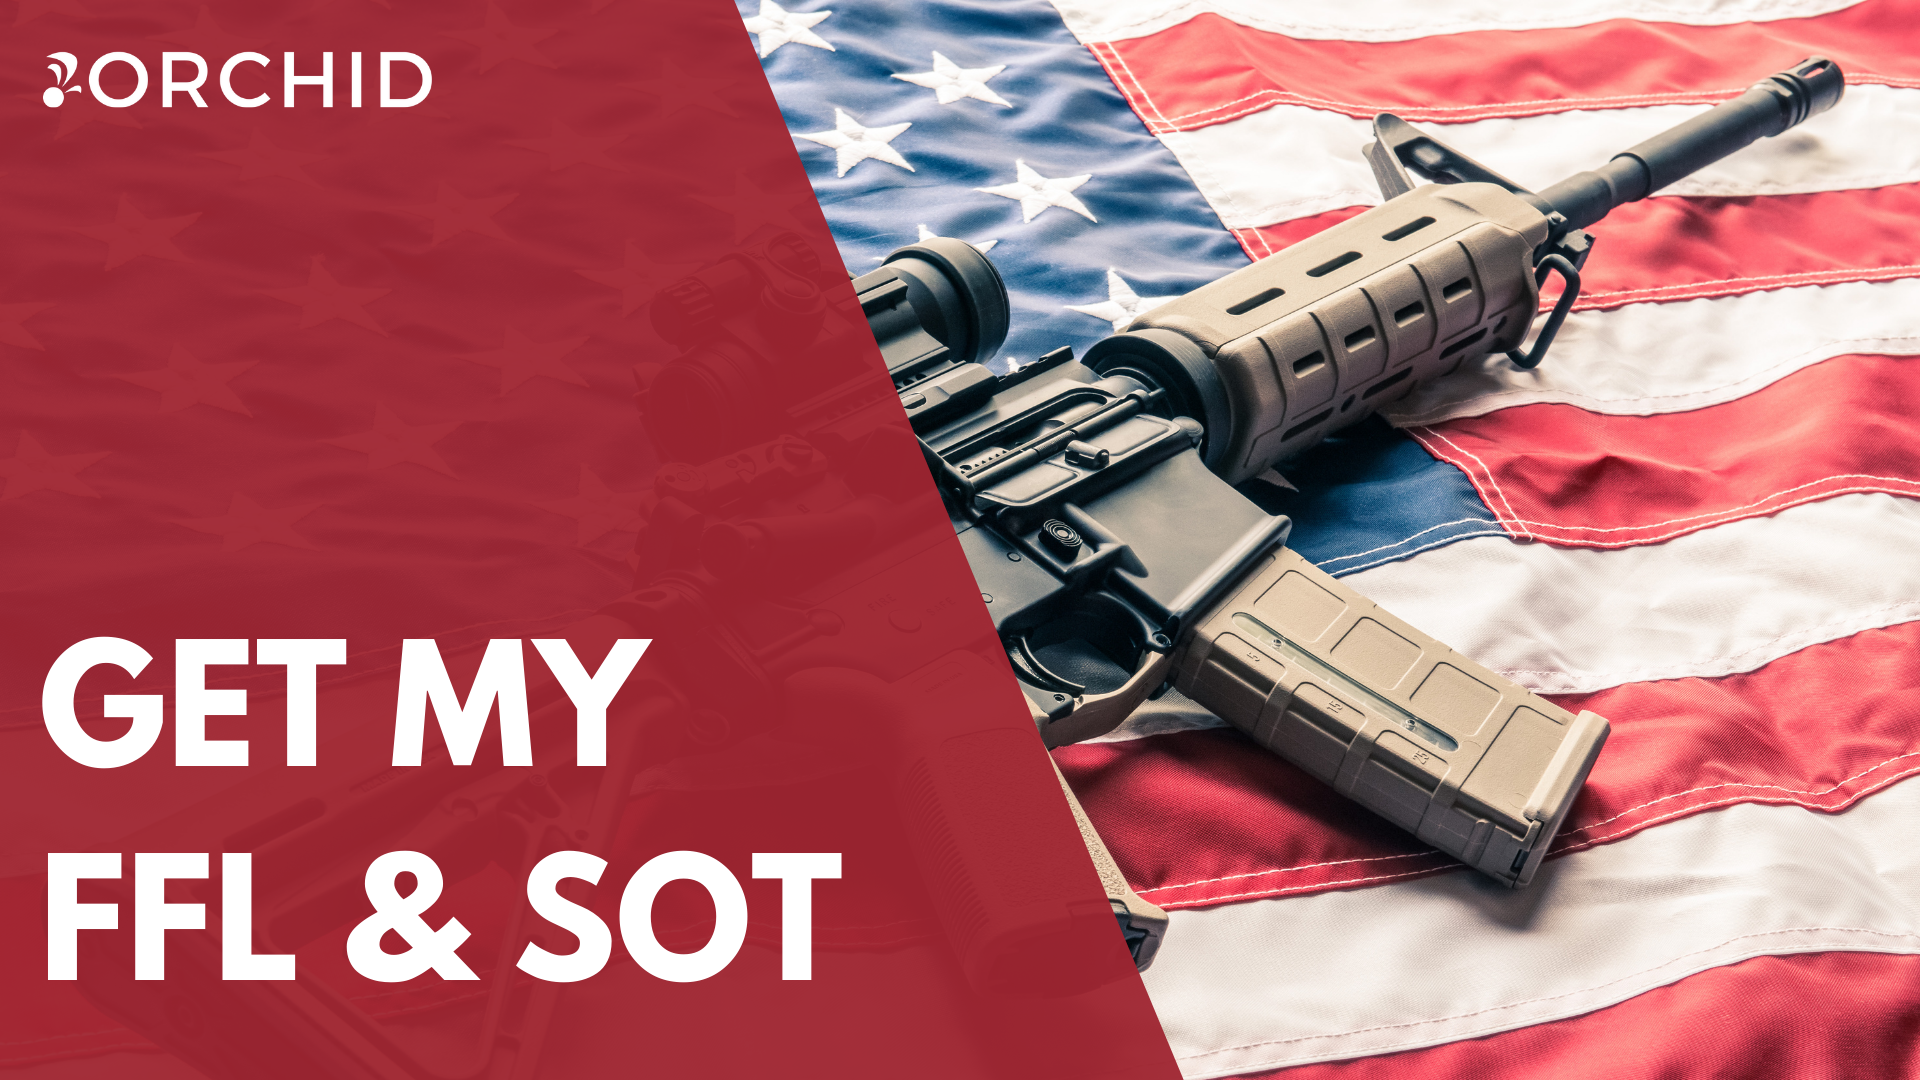 "Get My FFL & SOT" teaches you how to make money with a licensed firearm business